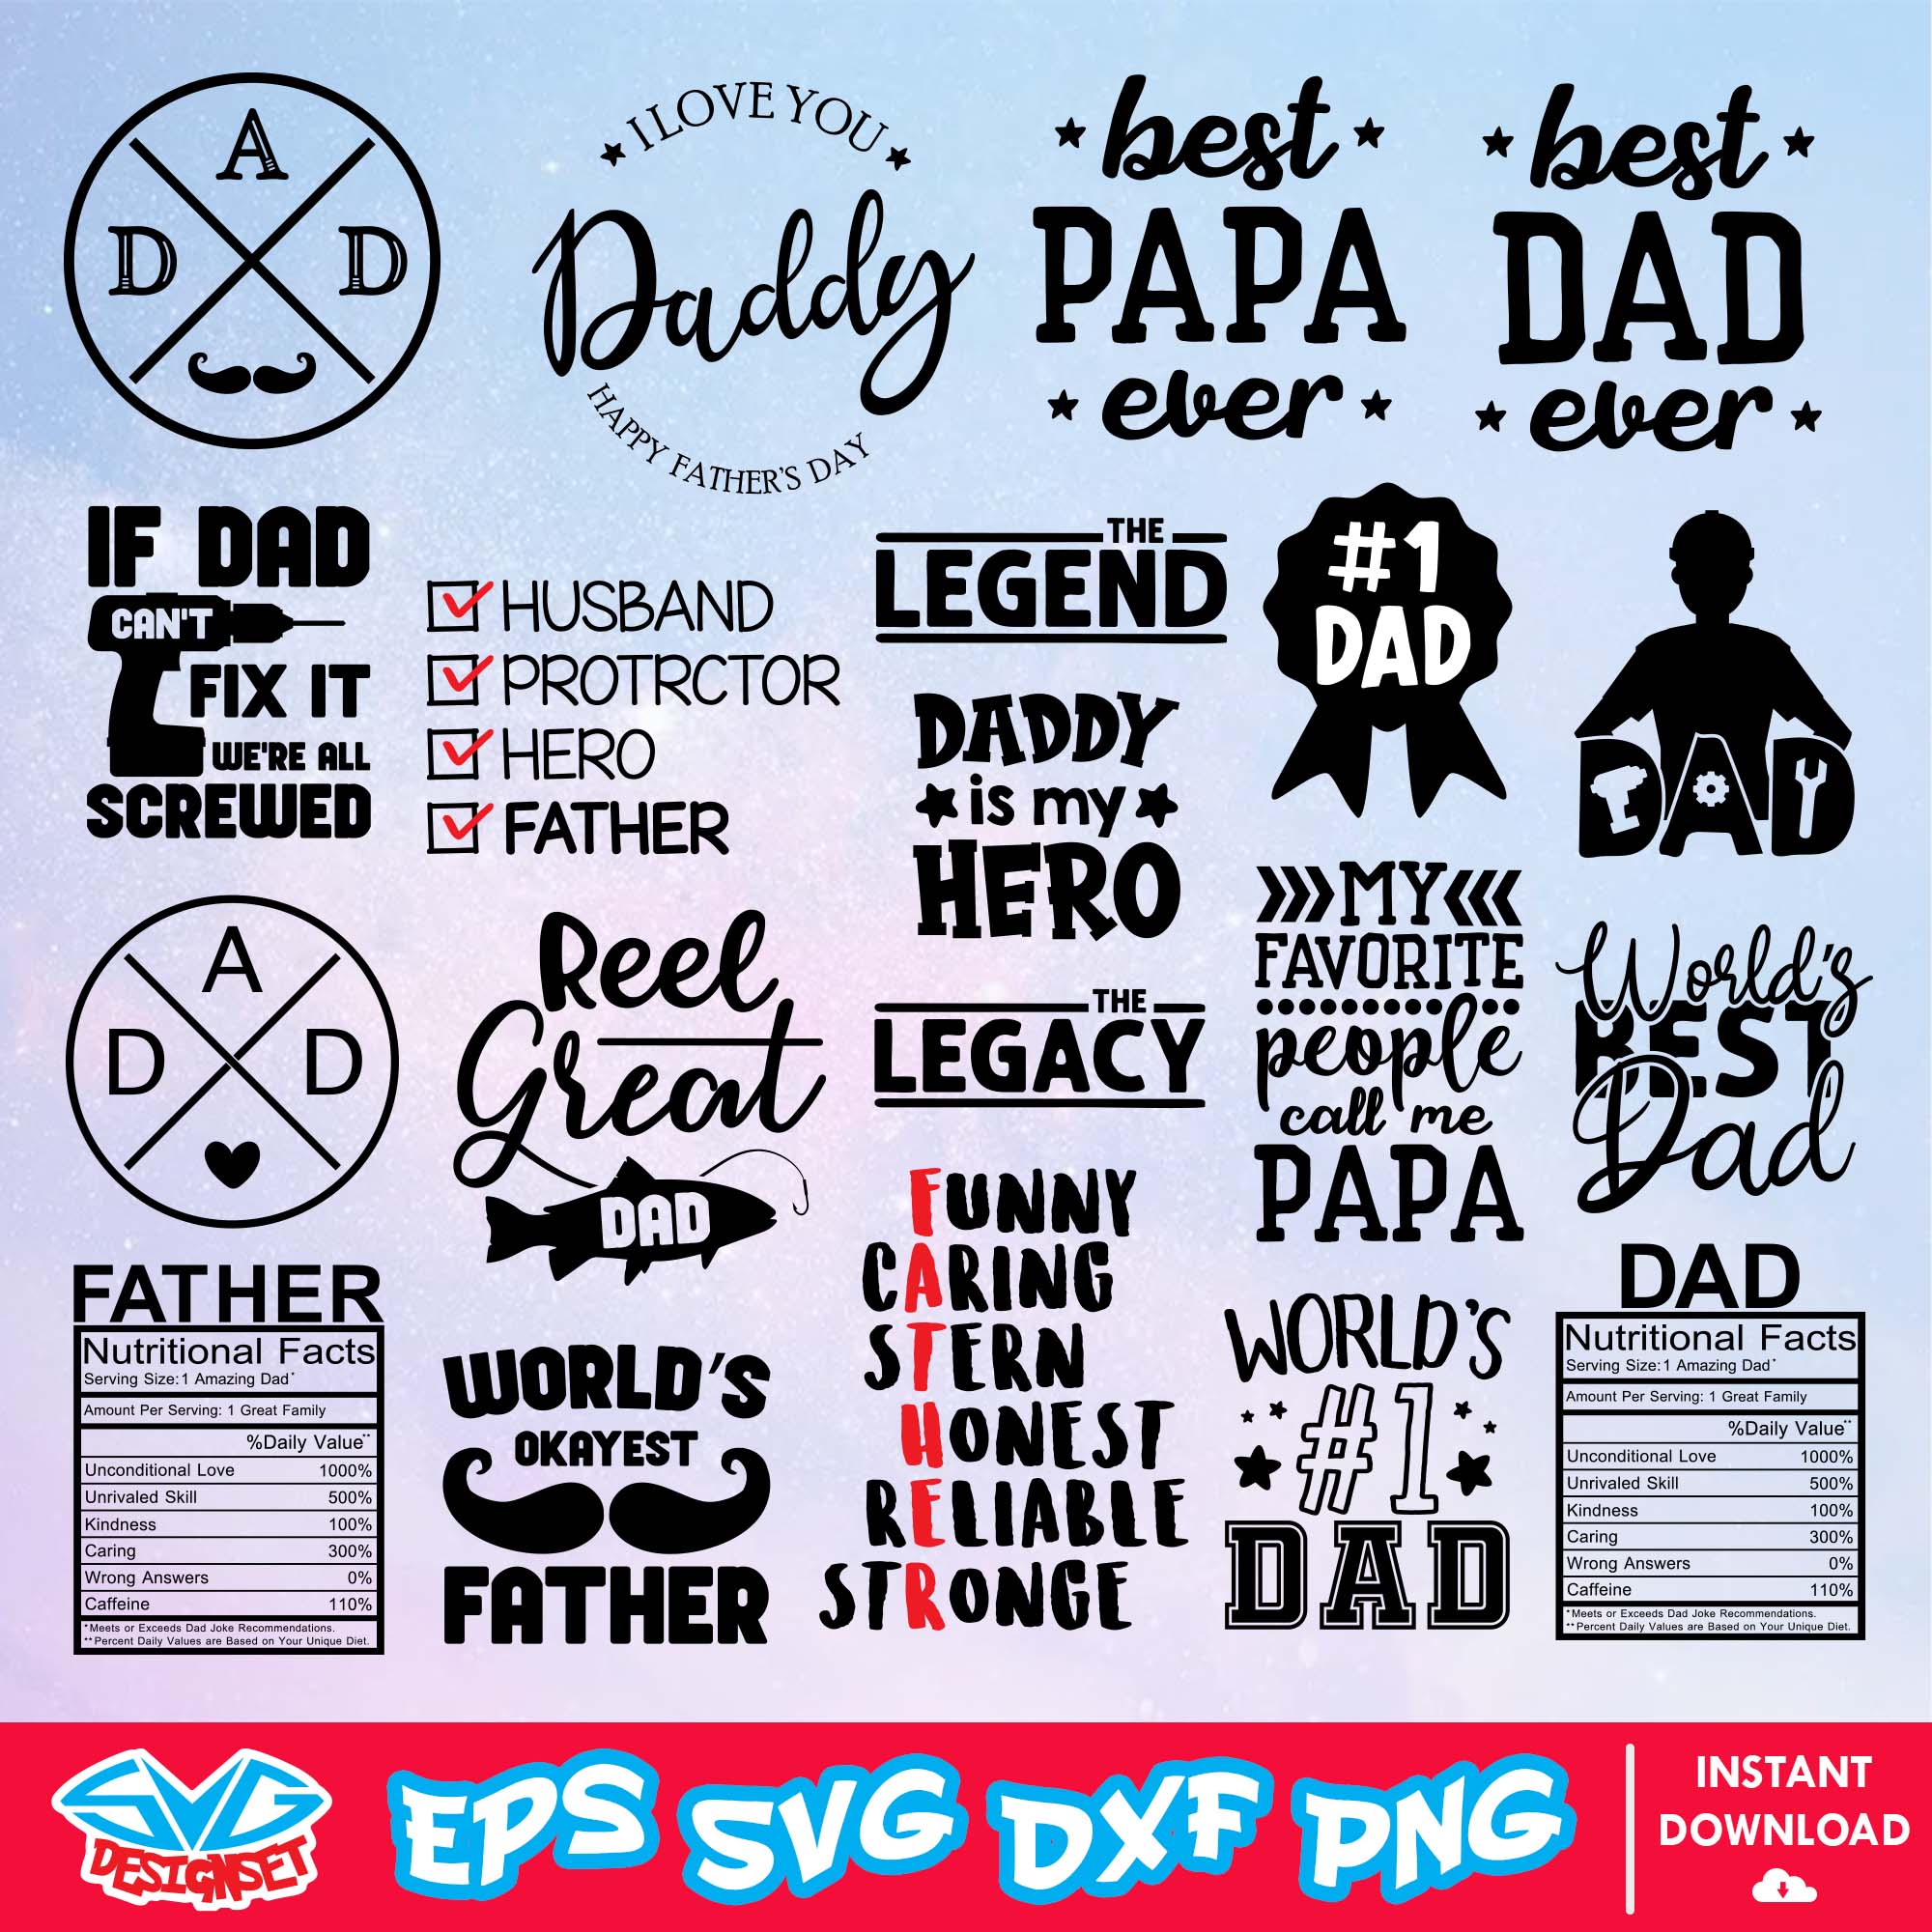 Happy Father's Day Bundle Svg, Dxf, Eps, Png, Clipart, Silhouette and Cut files for Cricut & Silhouette Cameo 2 - SVGDesignSet